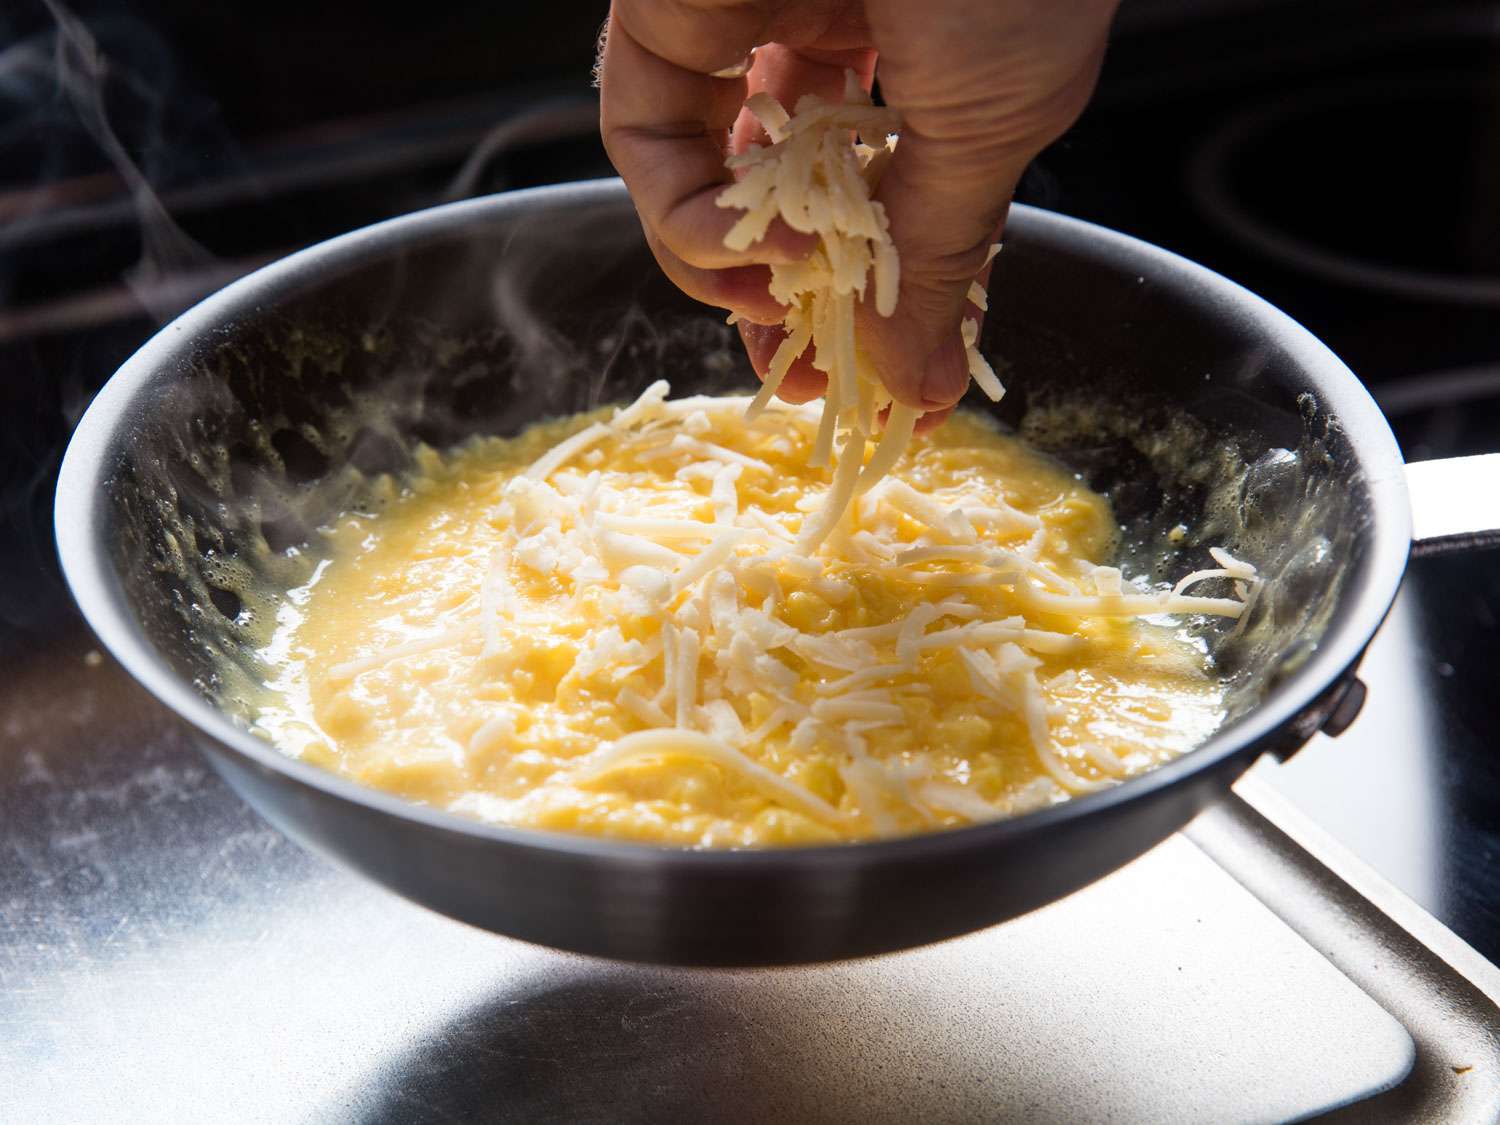 Sprinkling grated cheese into a pan of scrambling eggs